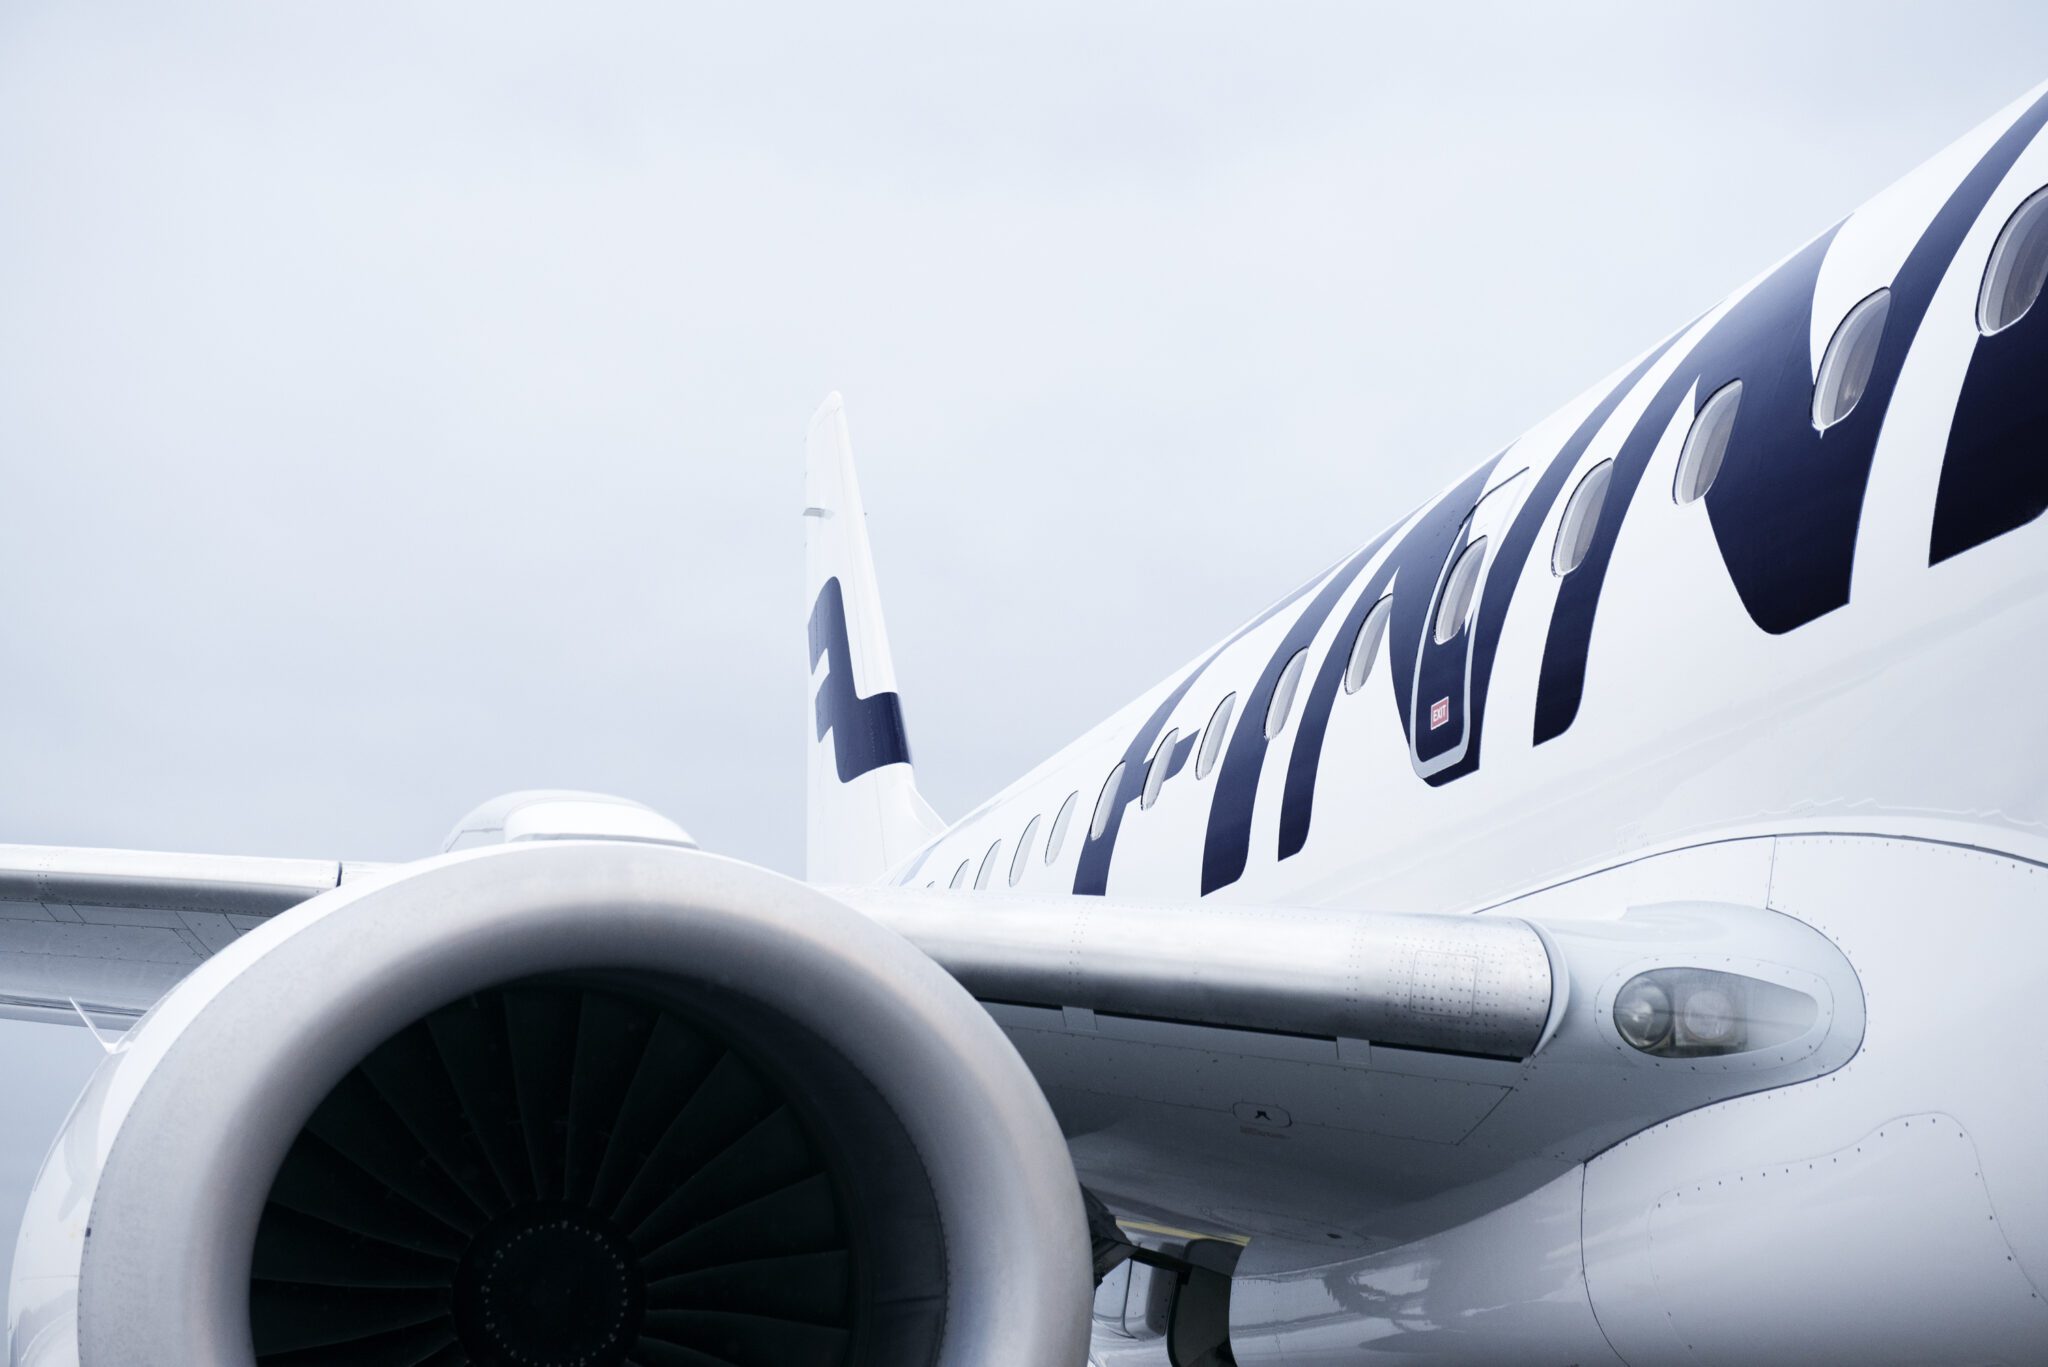 The side, wing and engine of a Finnair Embraer aircraft.